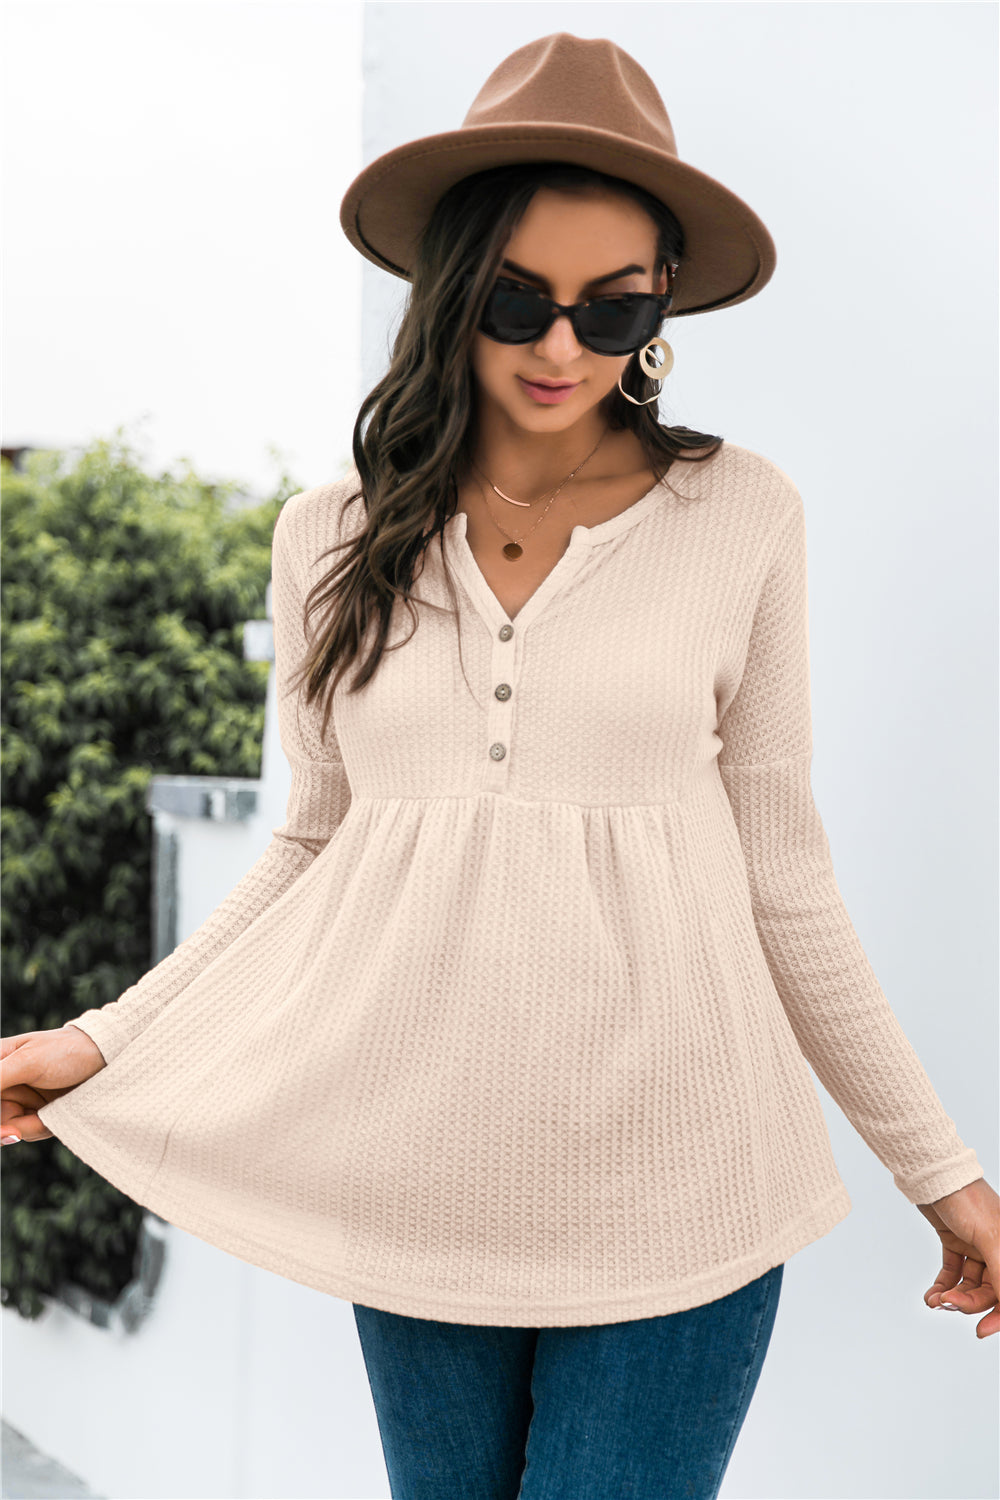 Button Front Waffle Knit Babydoll Top Button Front Waffle Knit Babydoll Top - M&R CORNER Trendsi Apricot / S